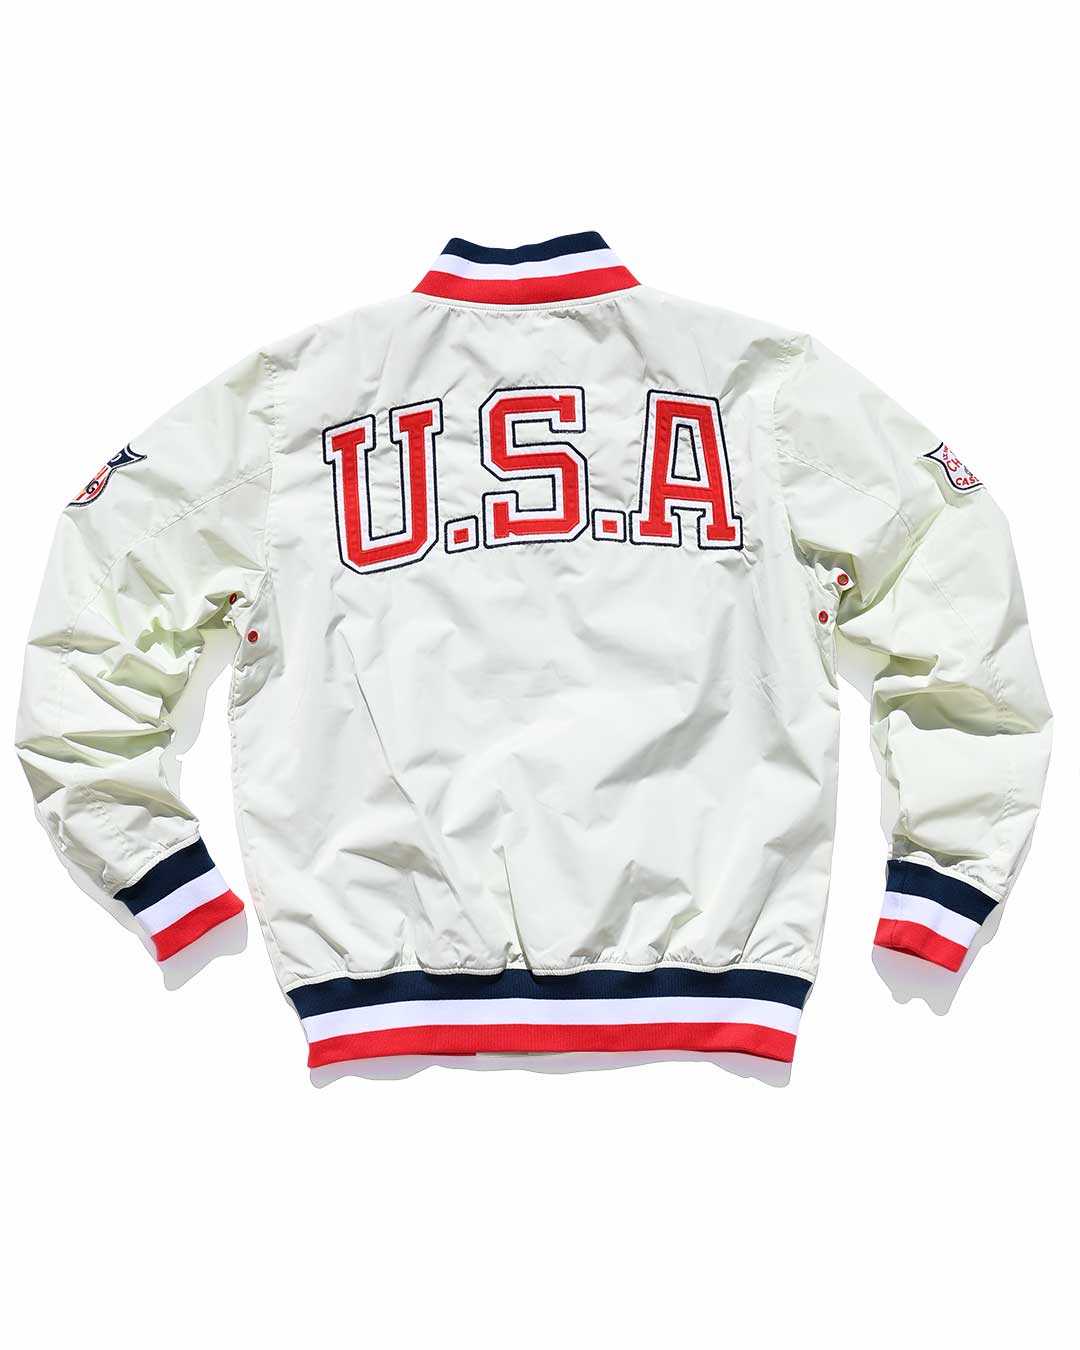 Cassius Clay USA Champ Stadium Jacket - Roots of Fight Canada